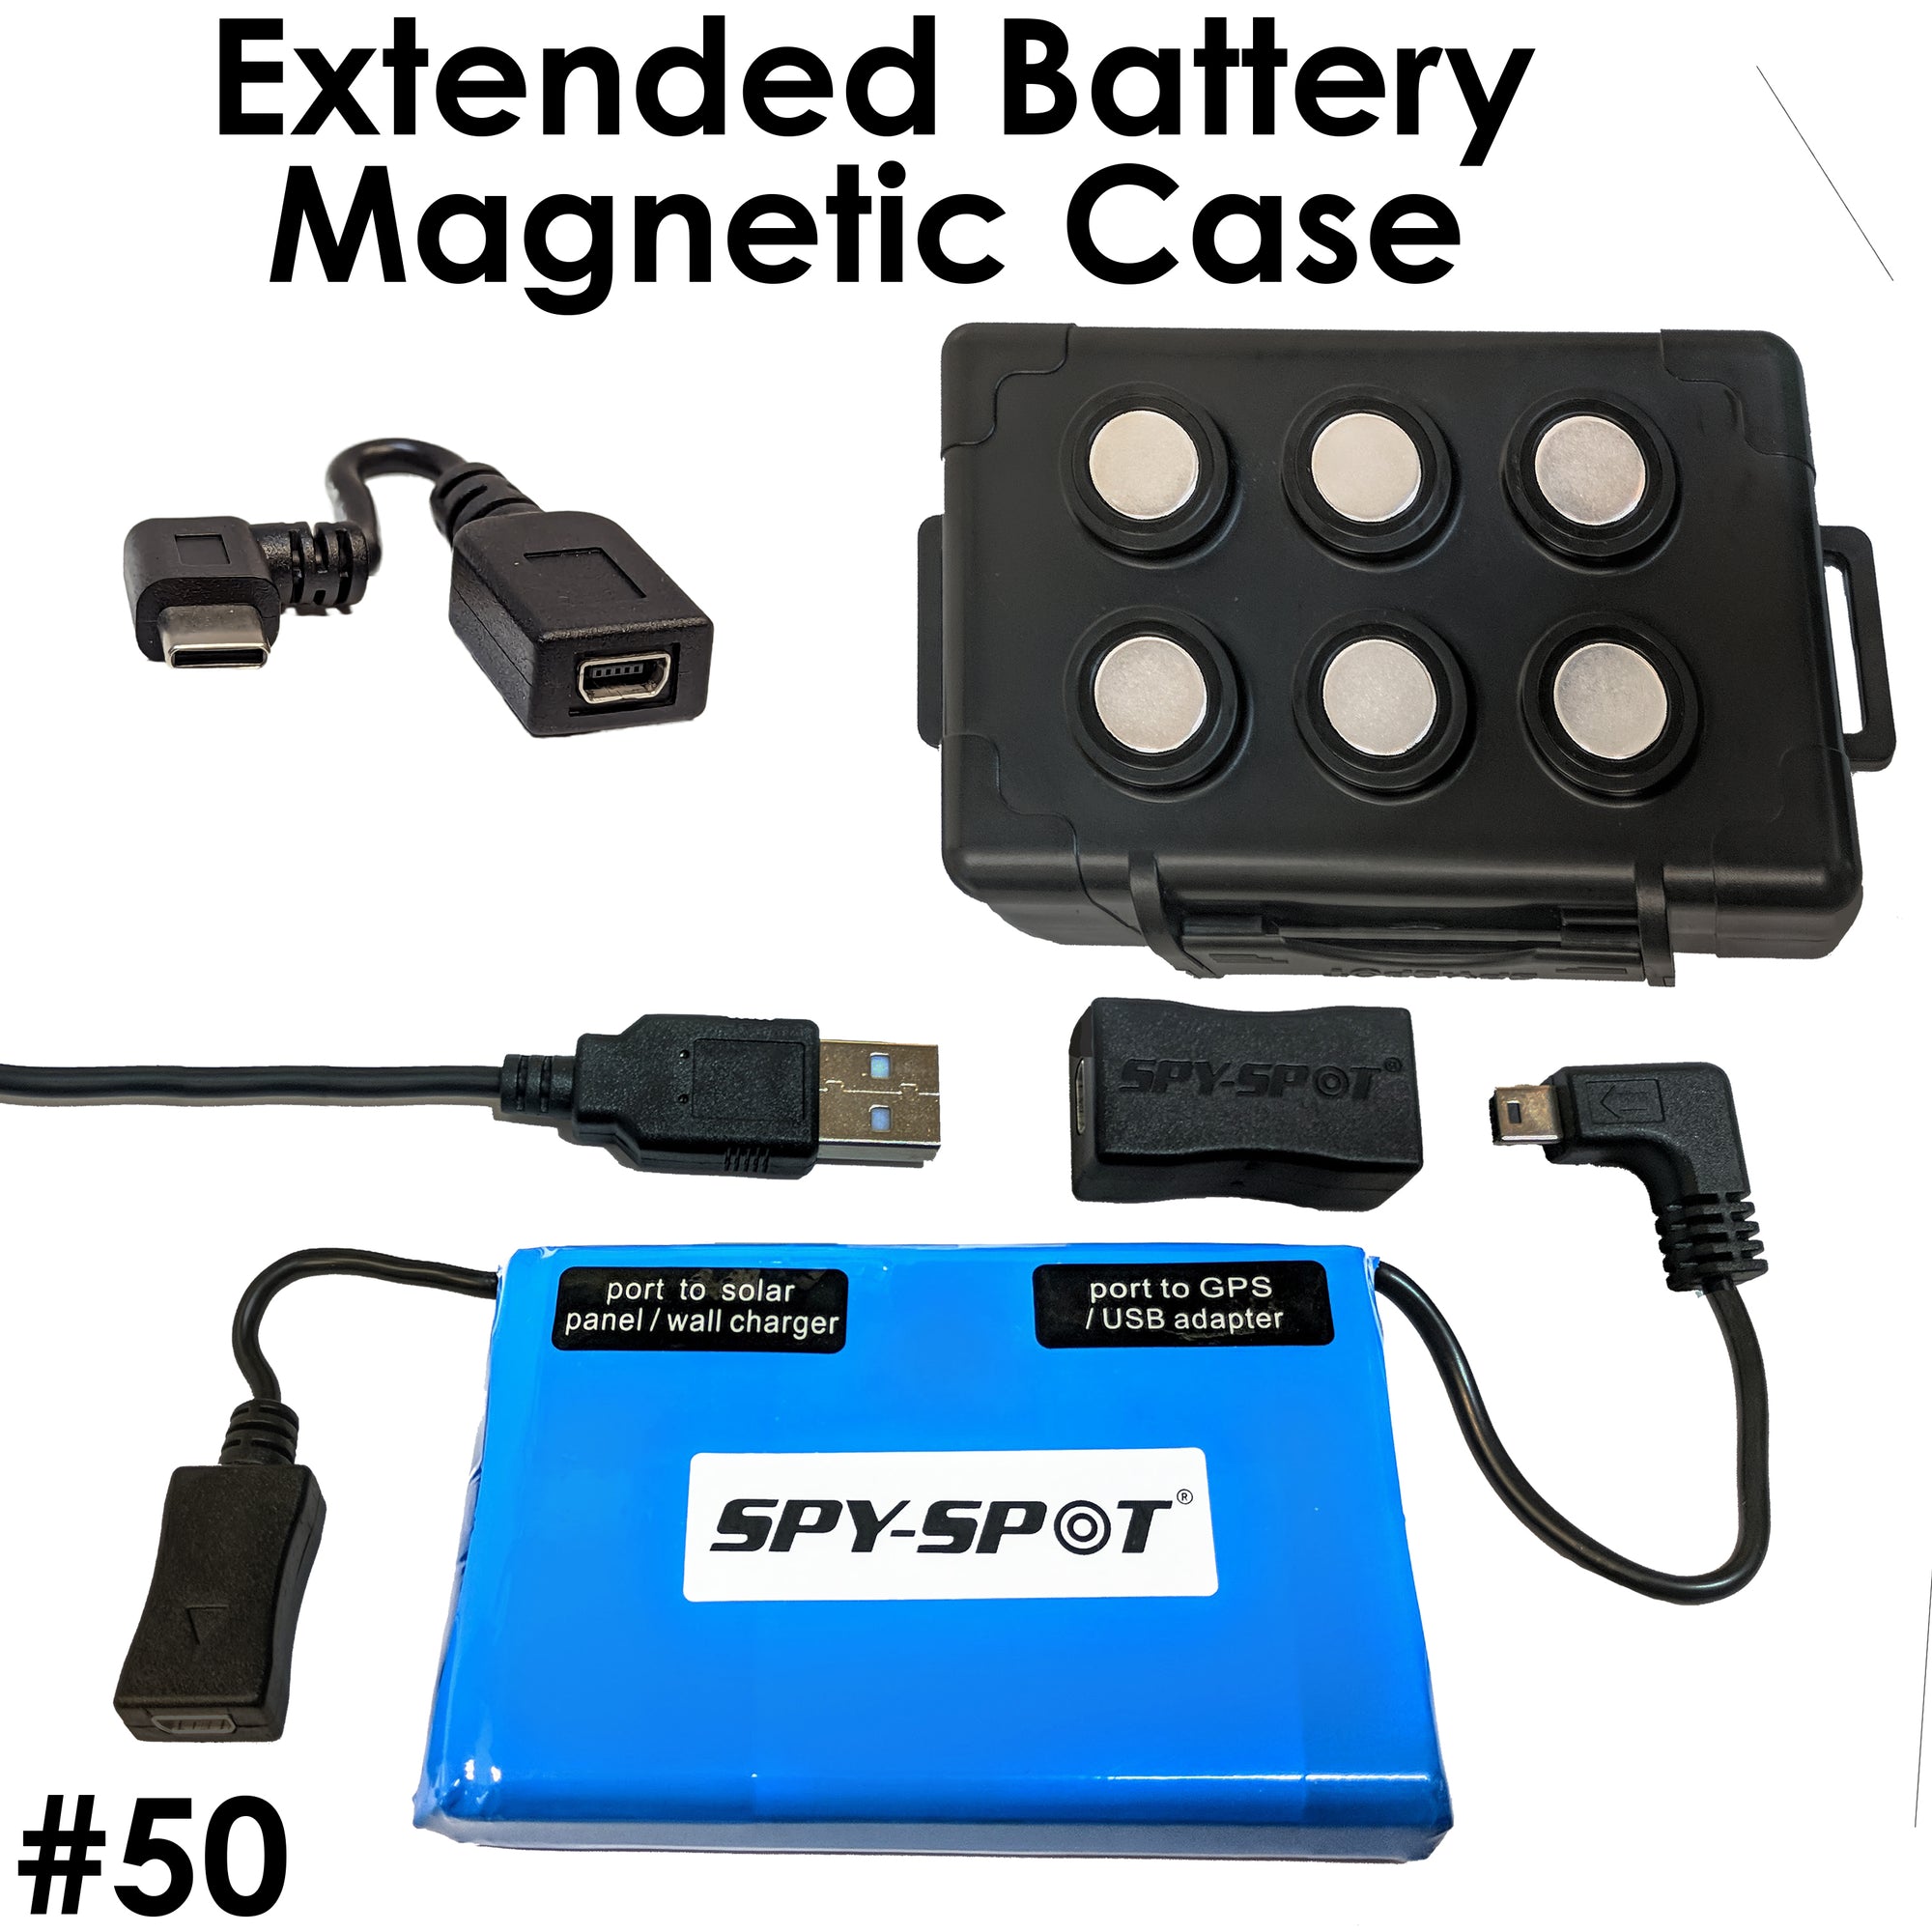 #50 - Extended battery with Large Case